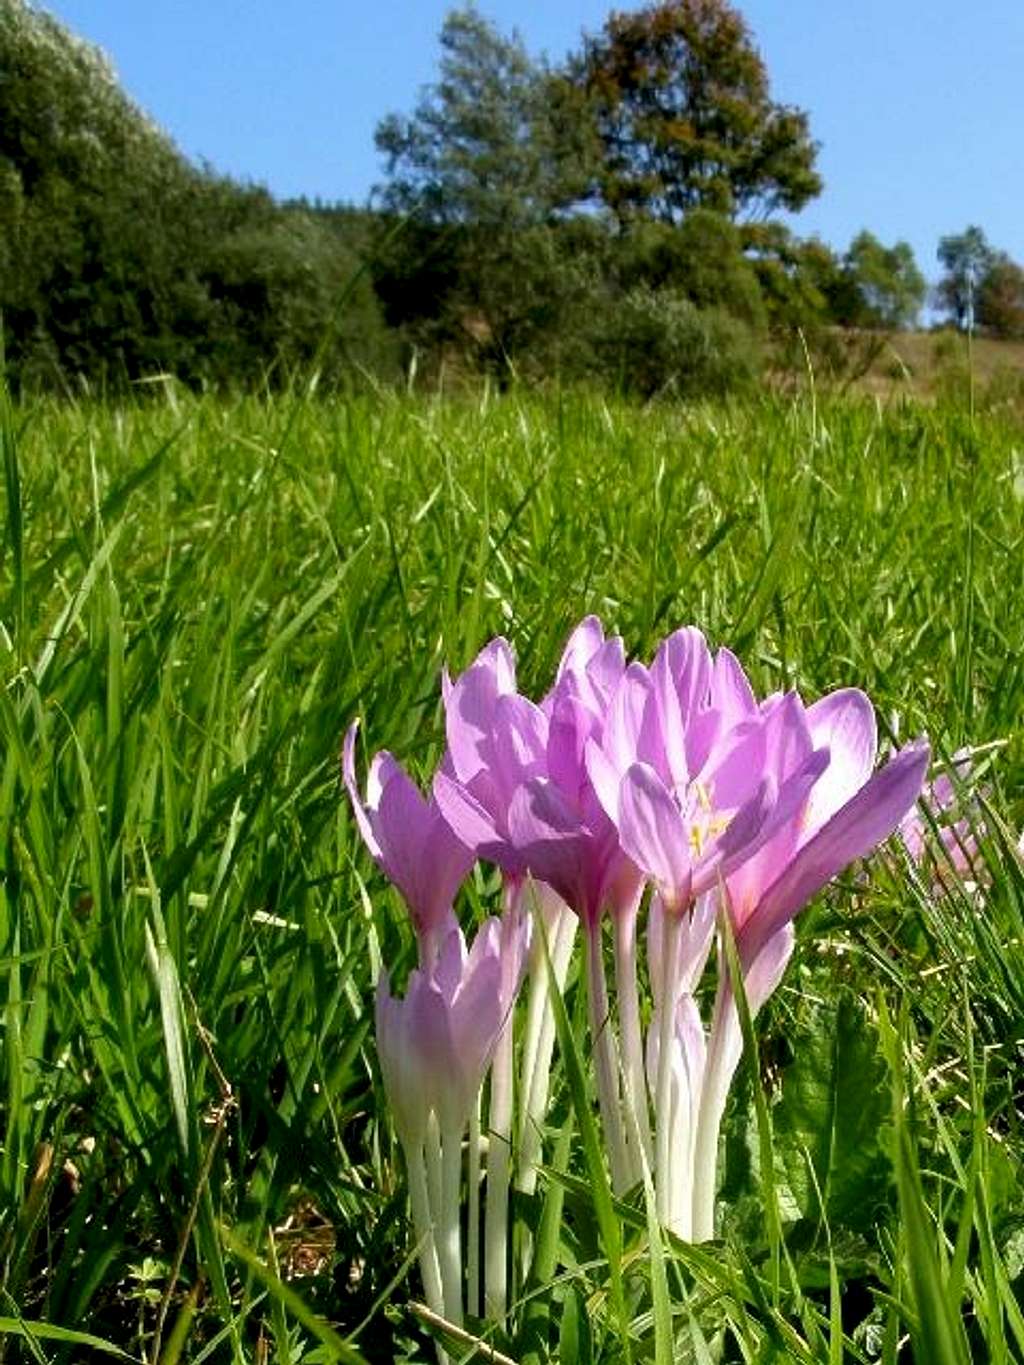 Early Sign of Fall - Autumn Crocus